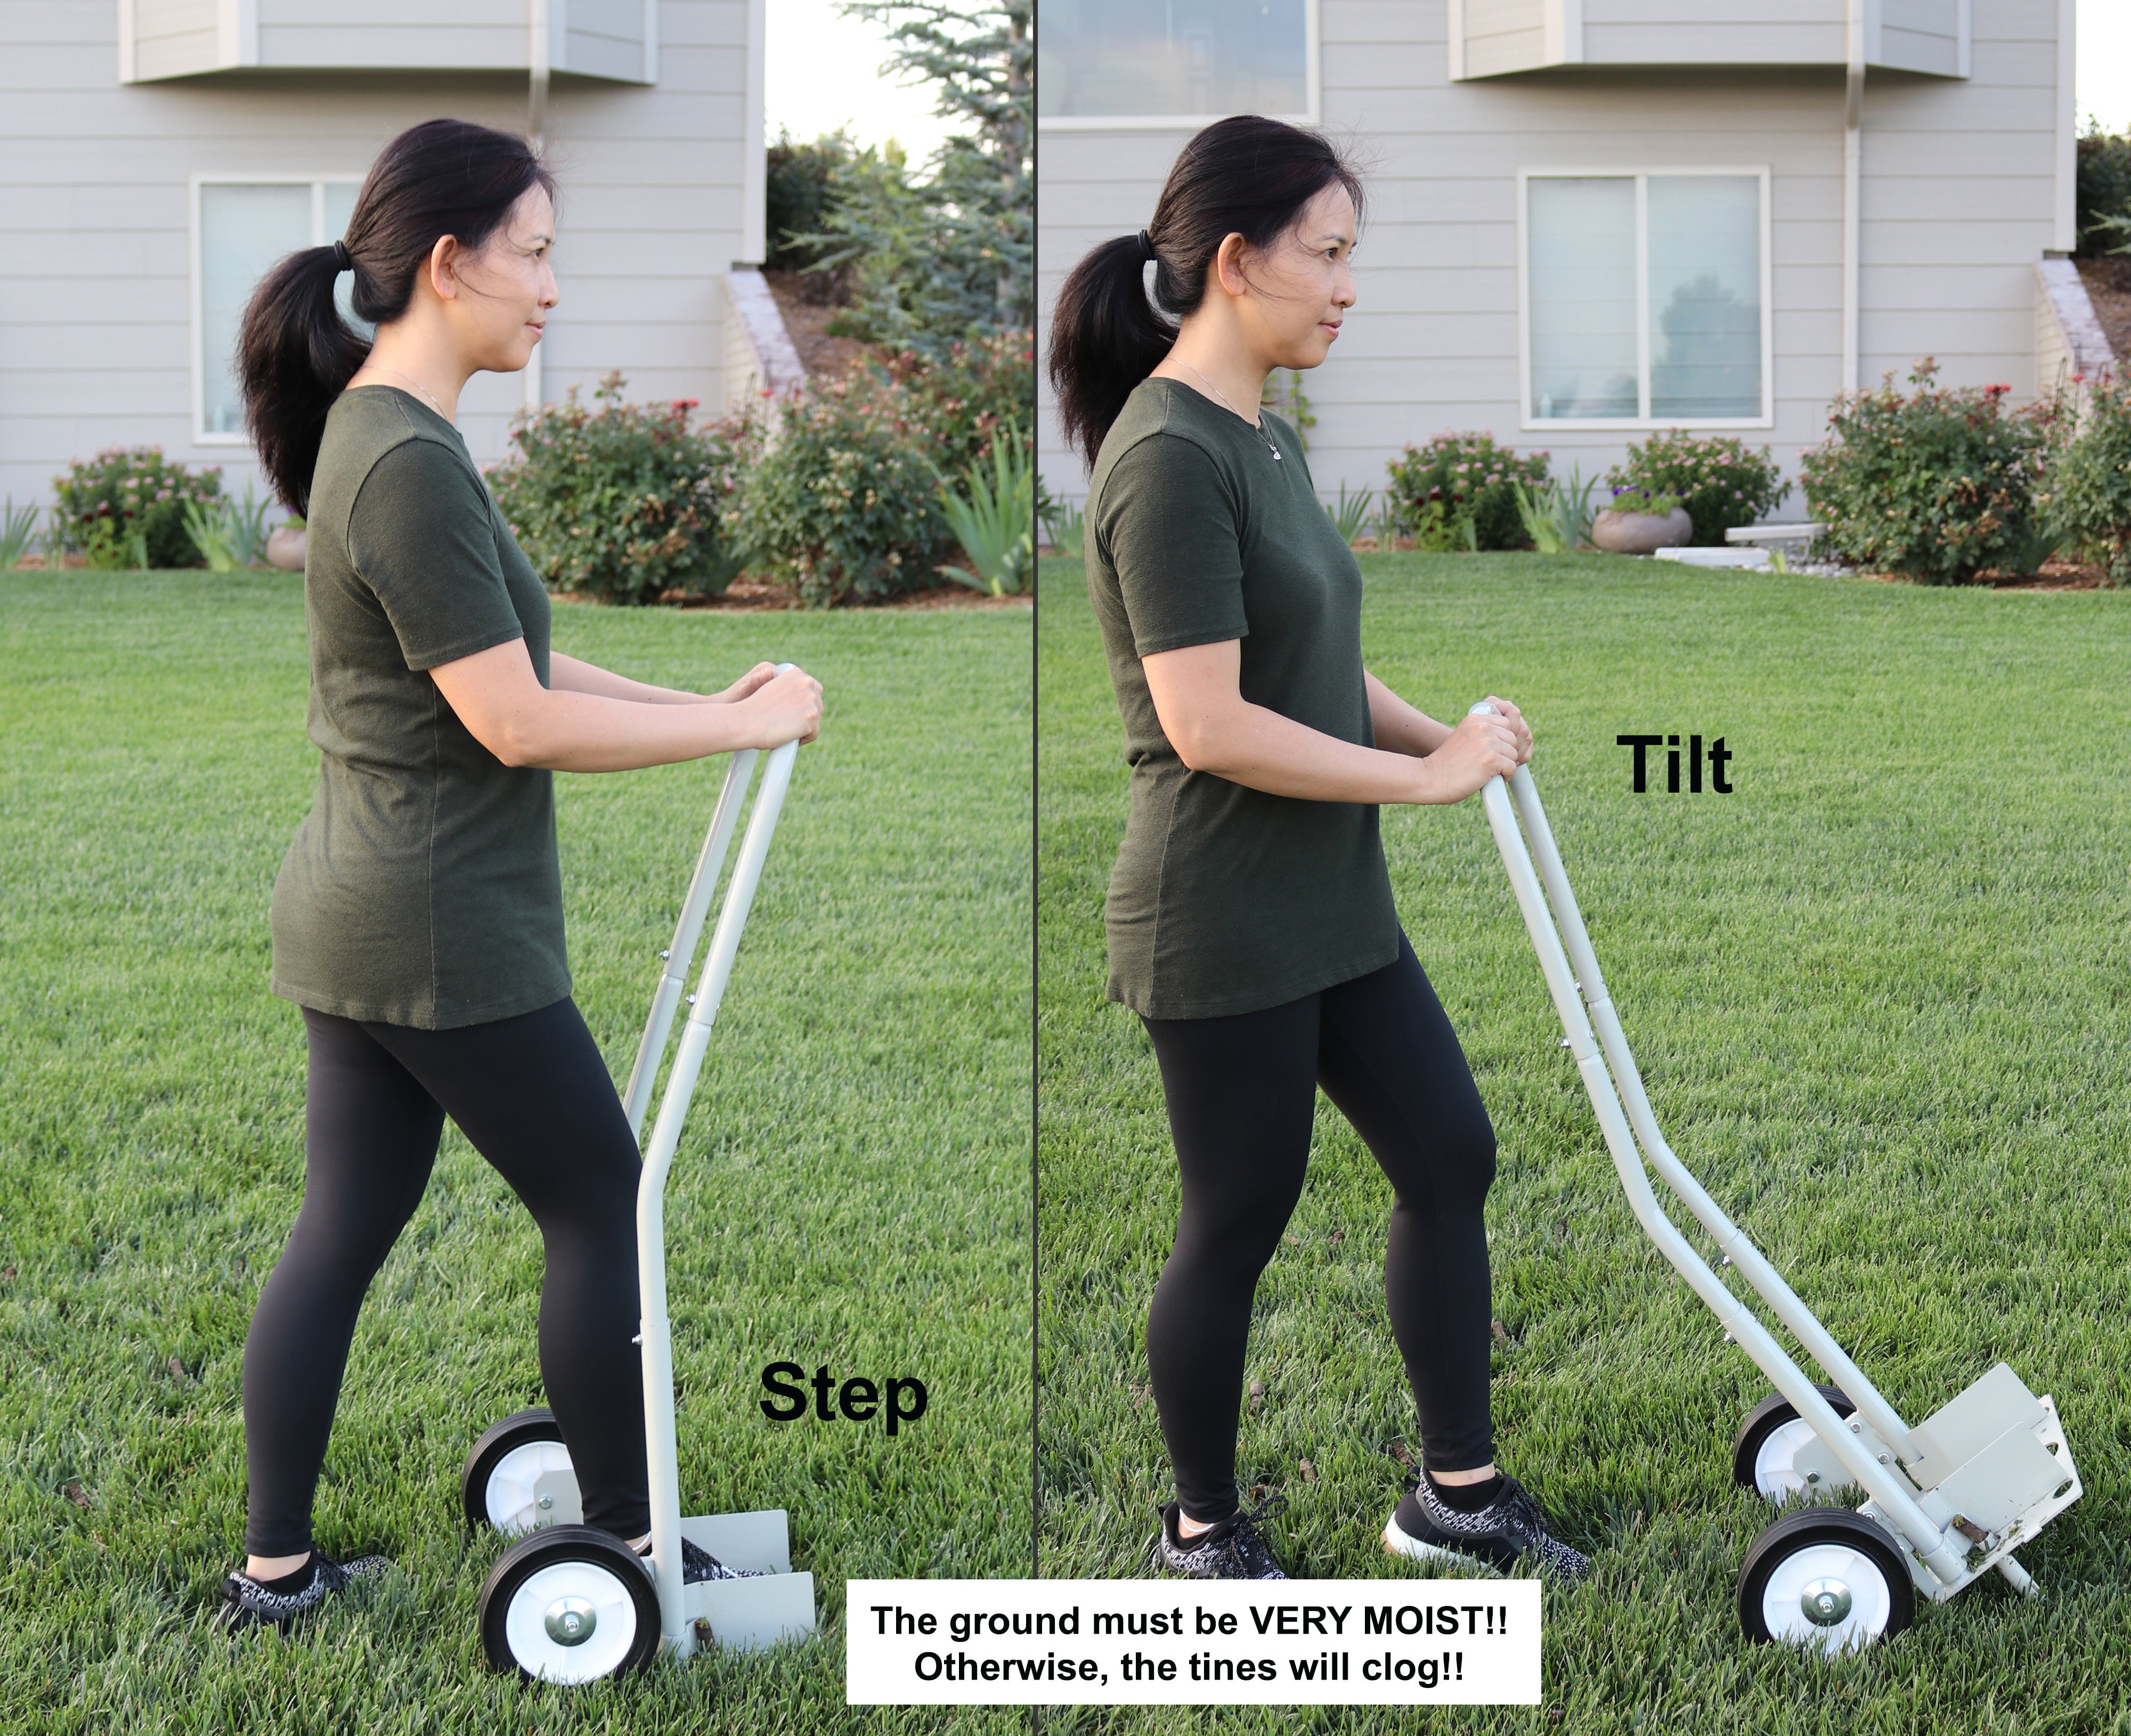 Step 'N Tilt Core Lawn Aerator Version 4 (Without Container)